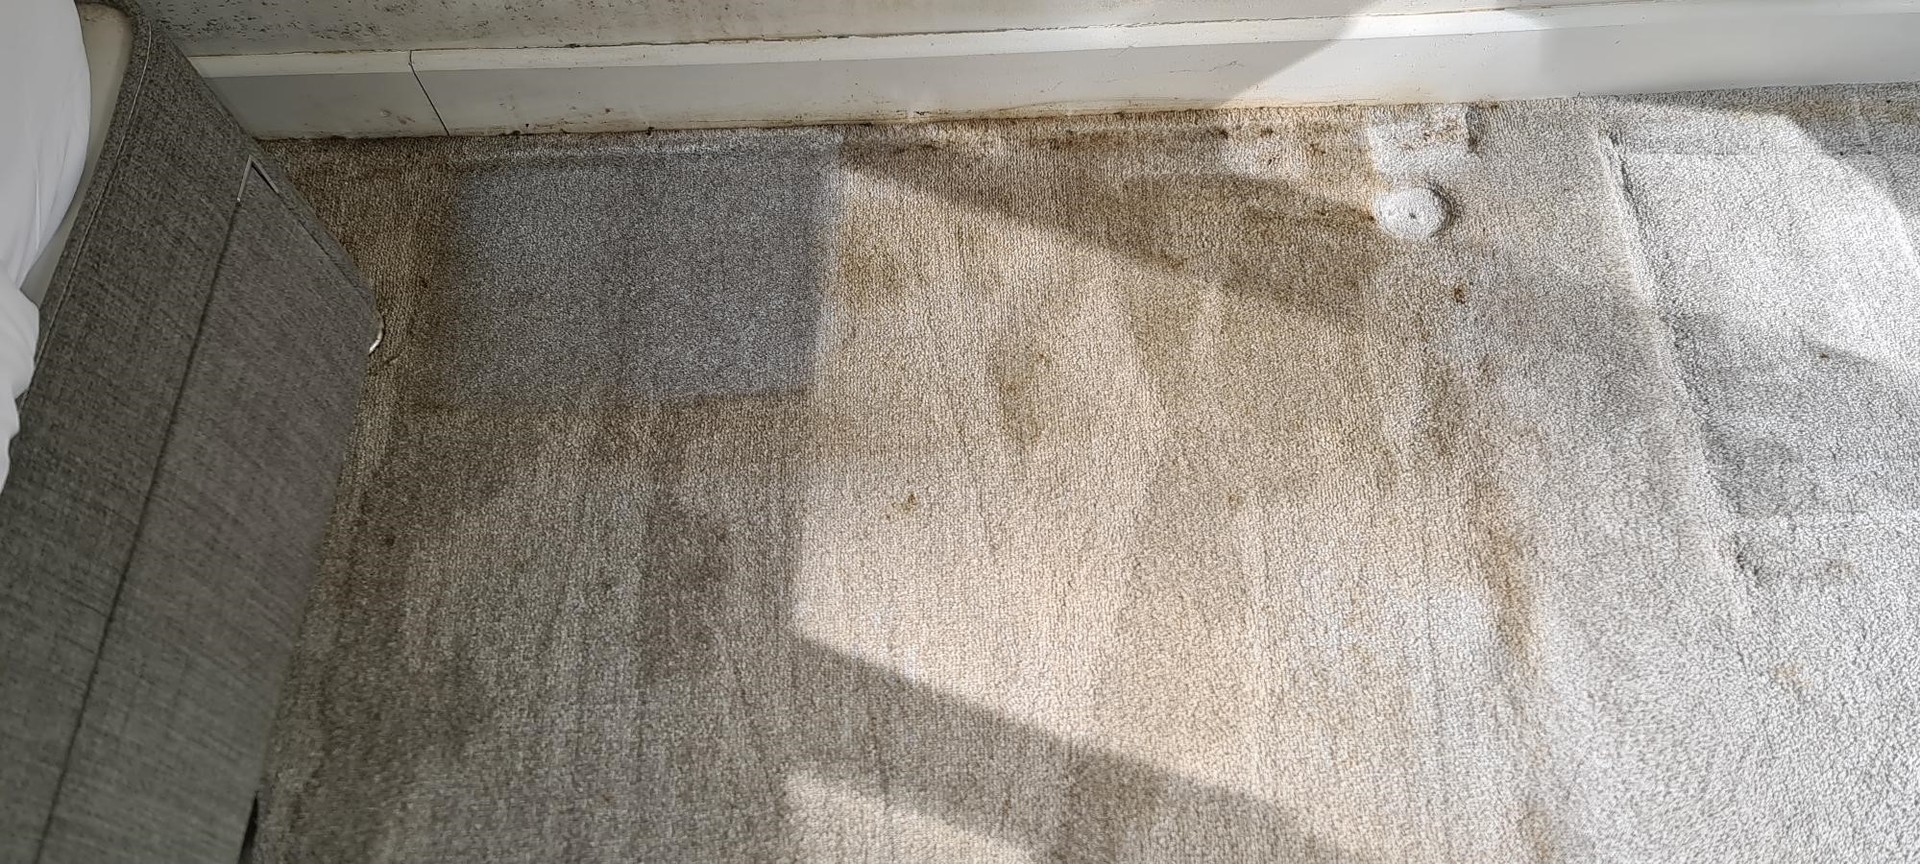 Professional Carpet Cleaning in Woking before